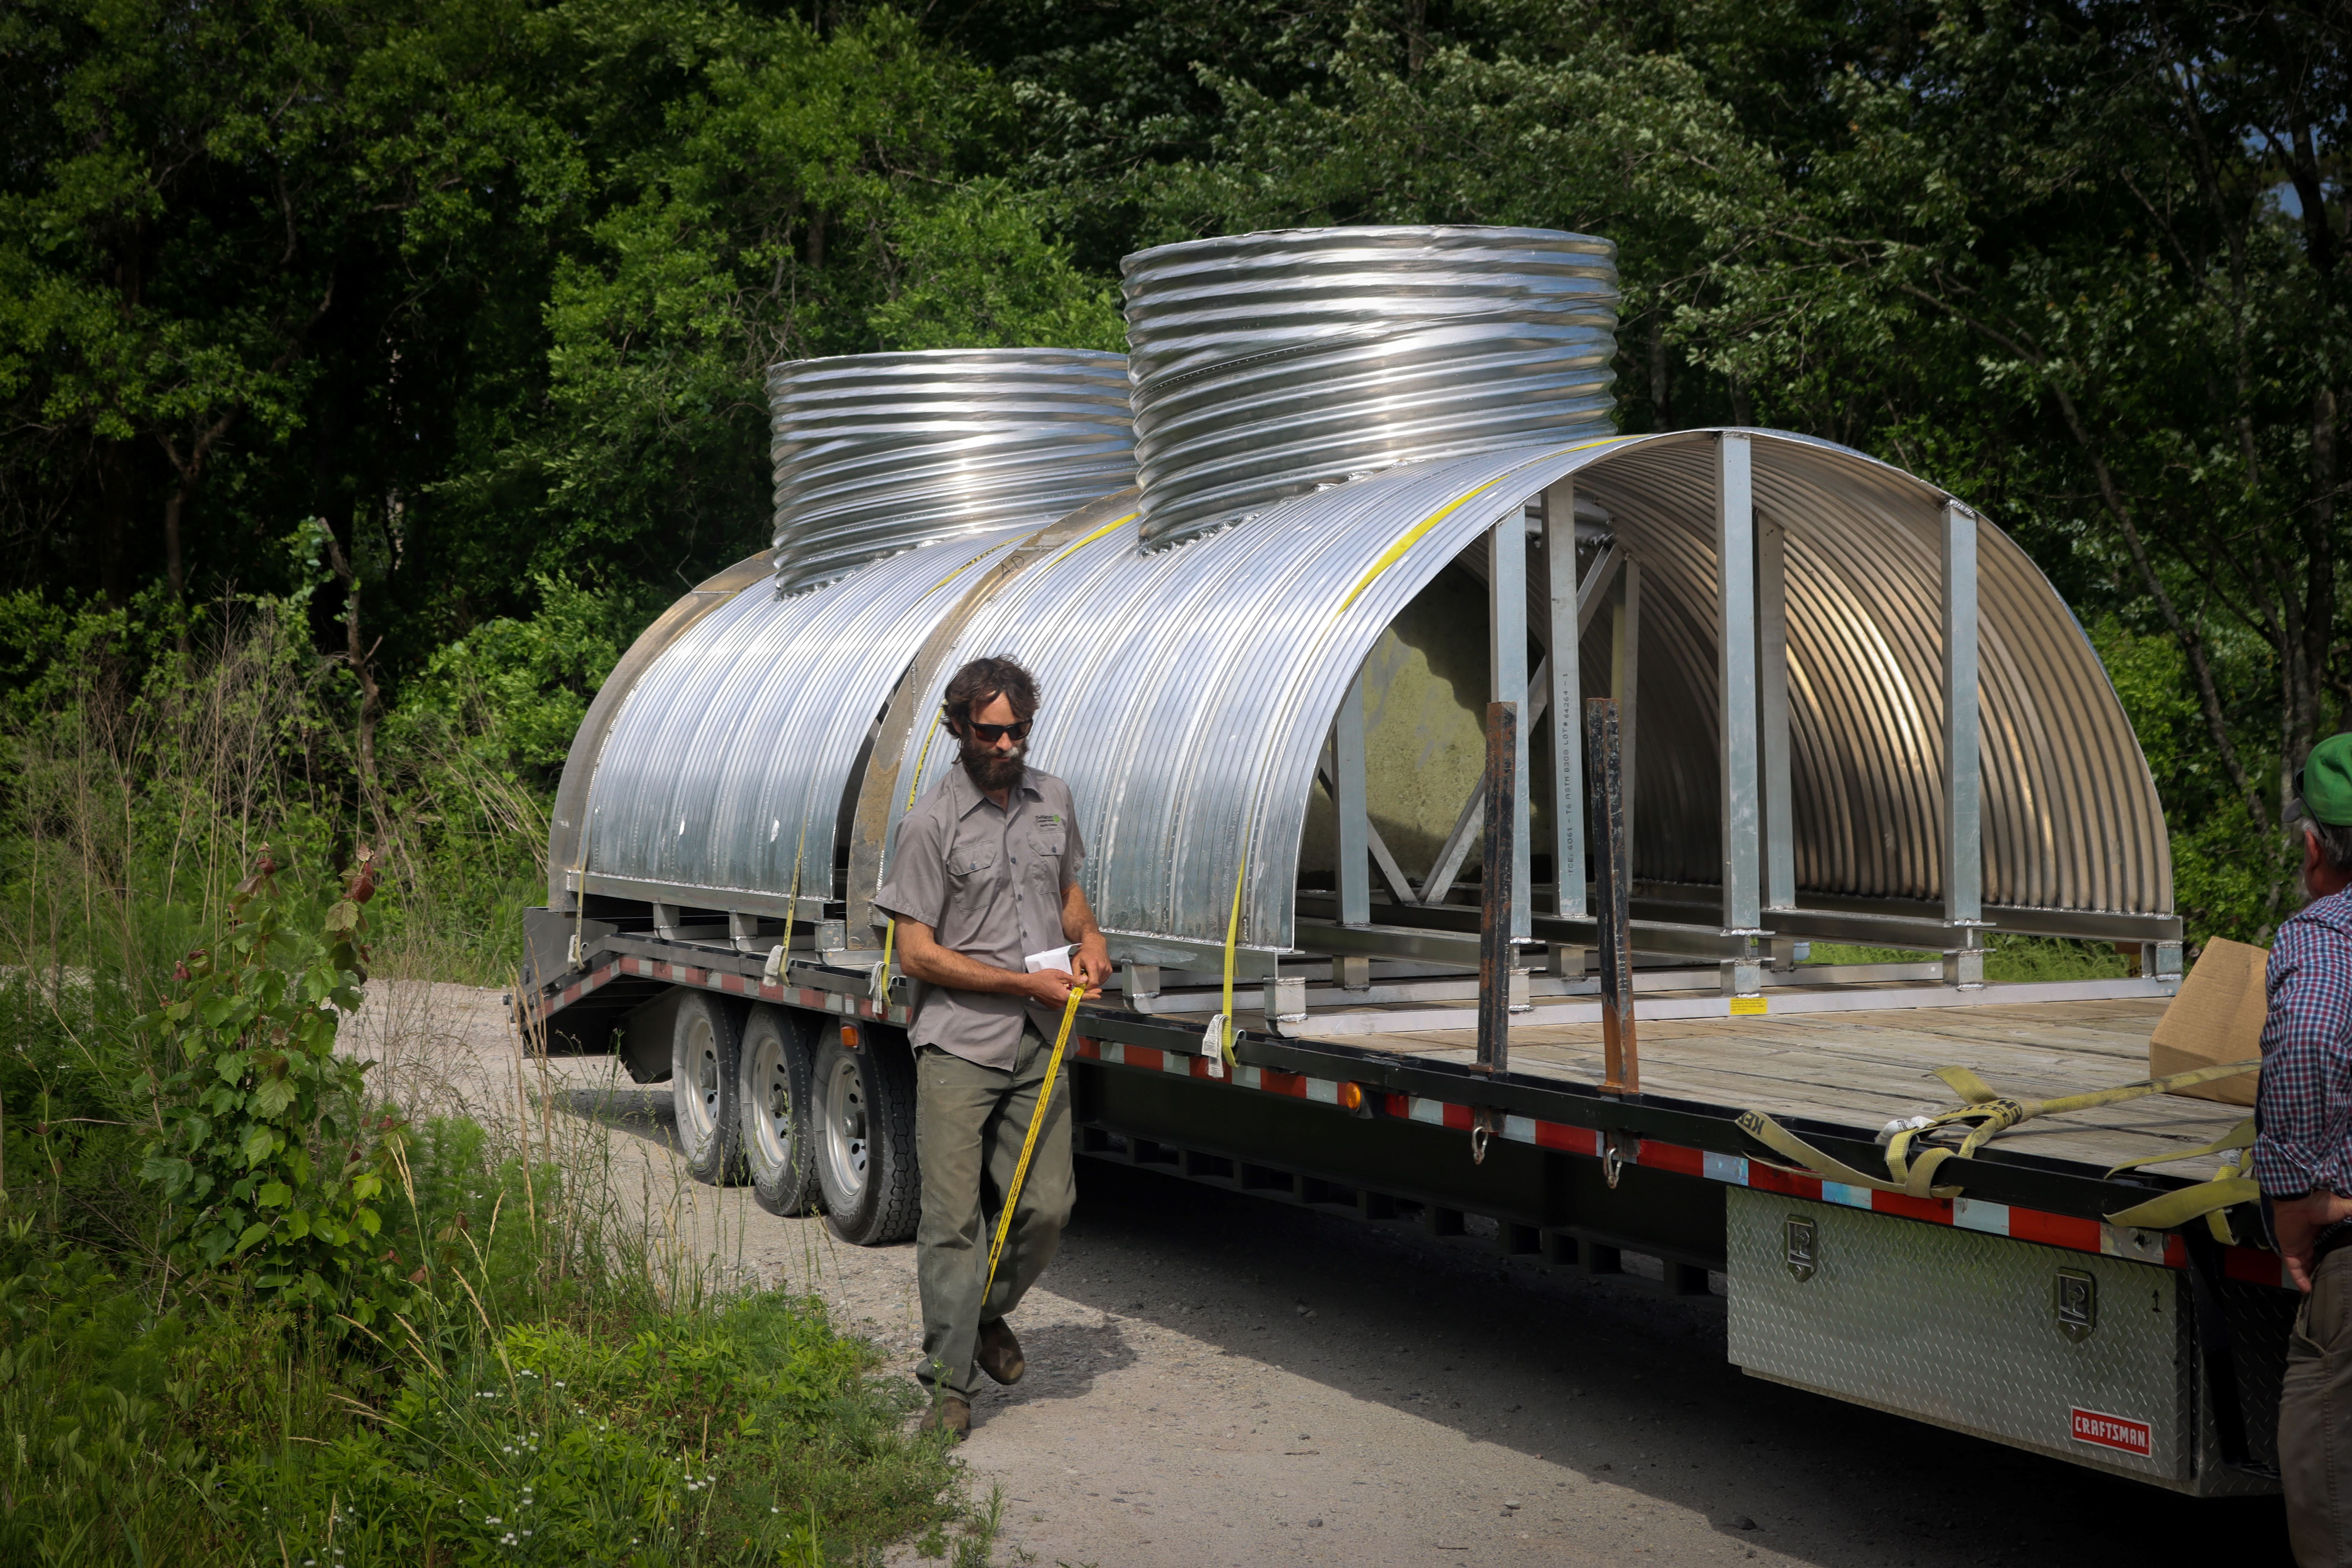 A man walks next to a flat bed truck carrying large metal water control structures.